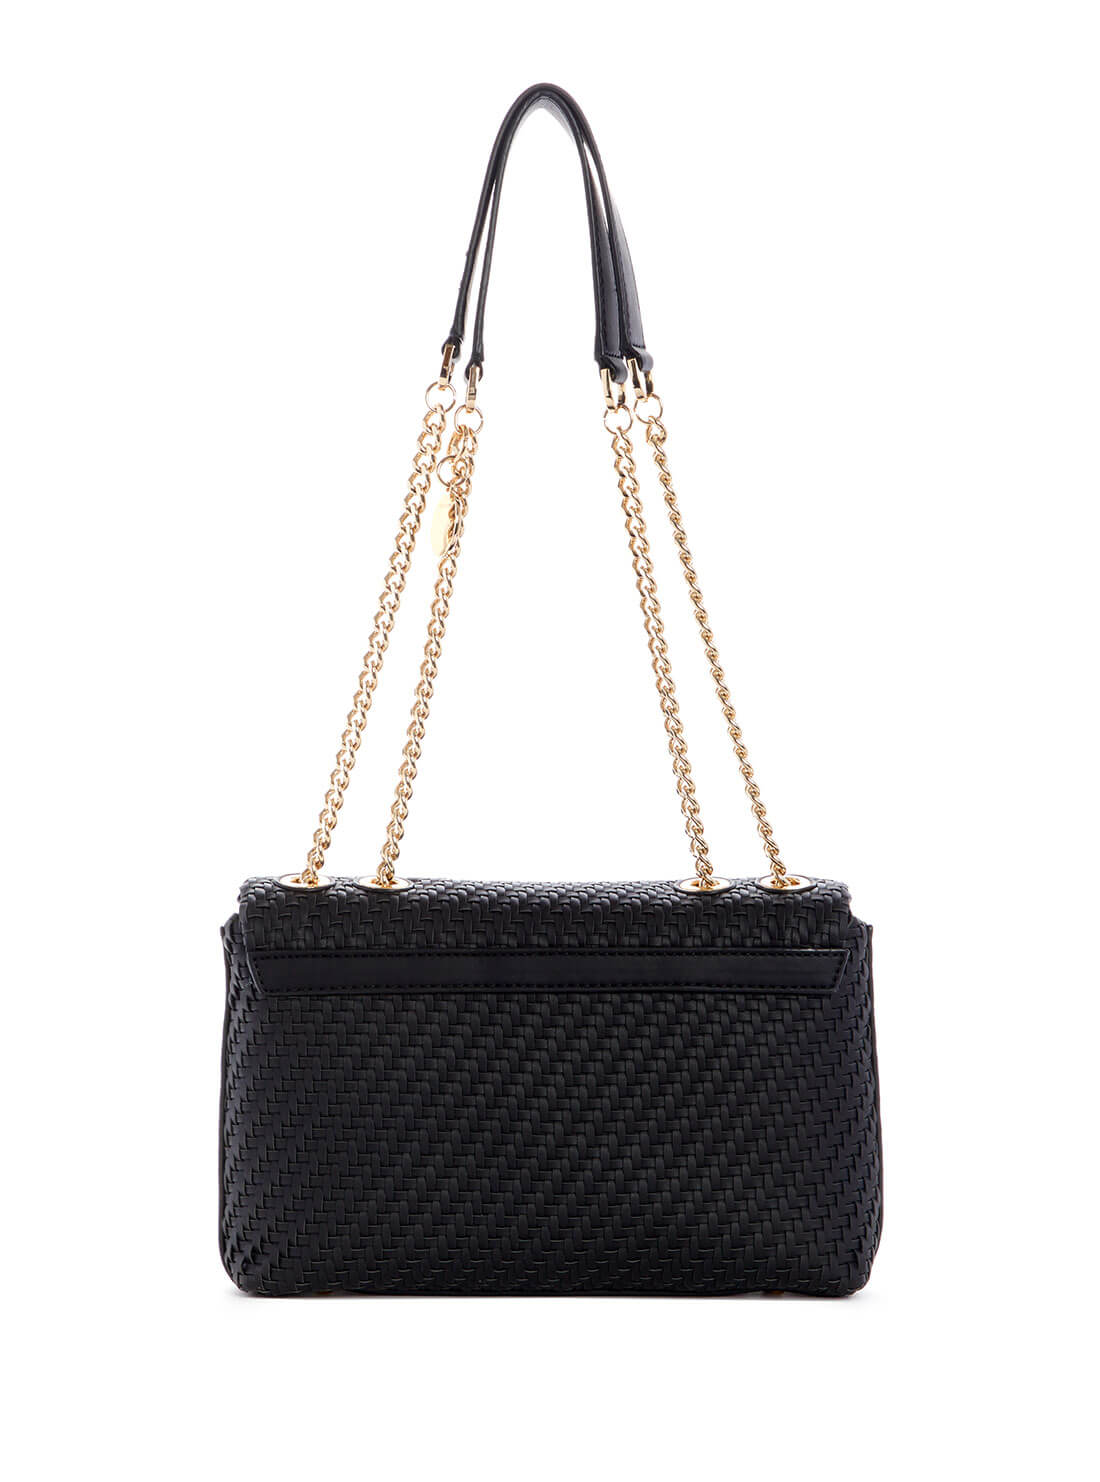 GUESS Womens Black Woven Hassie Convertible Crossbody VG839721 Back View